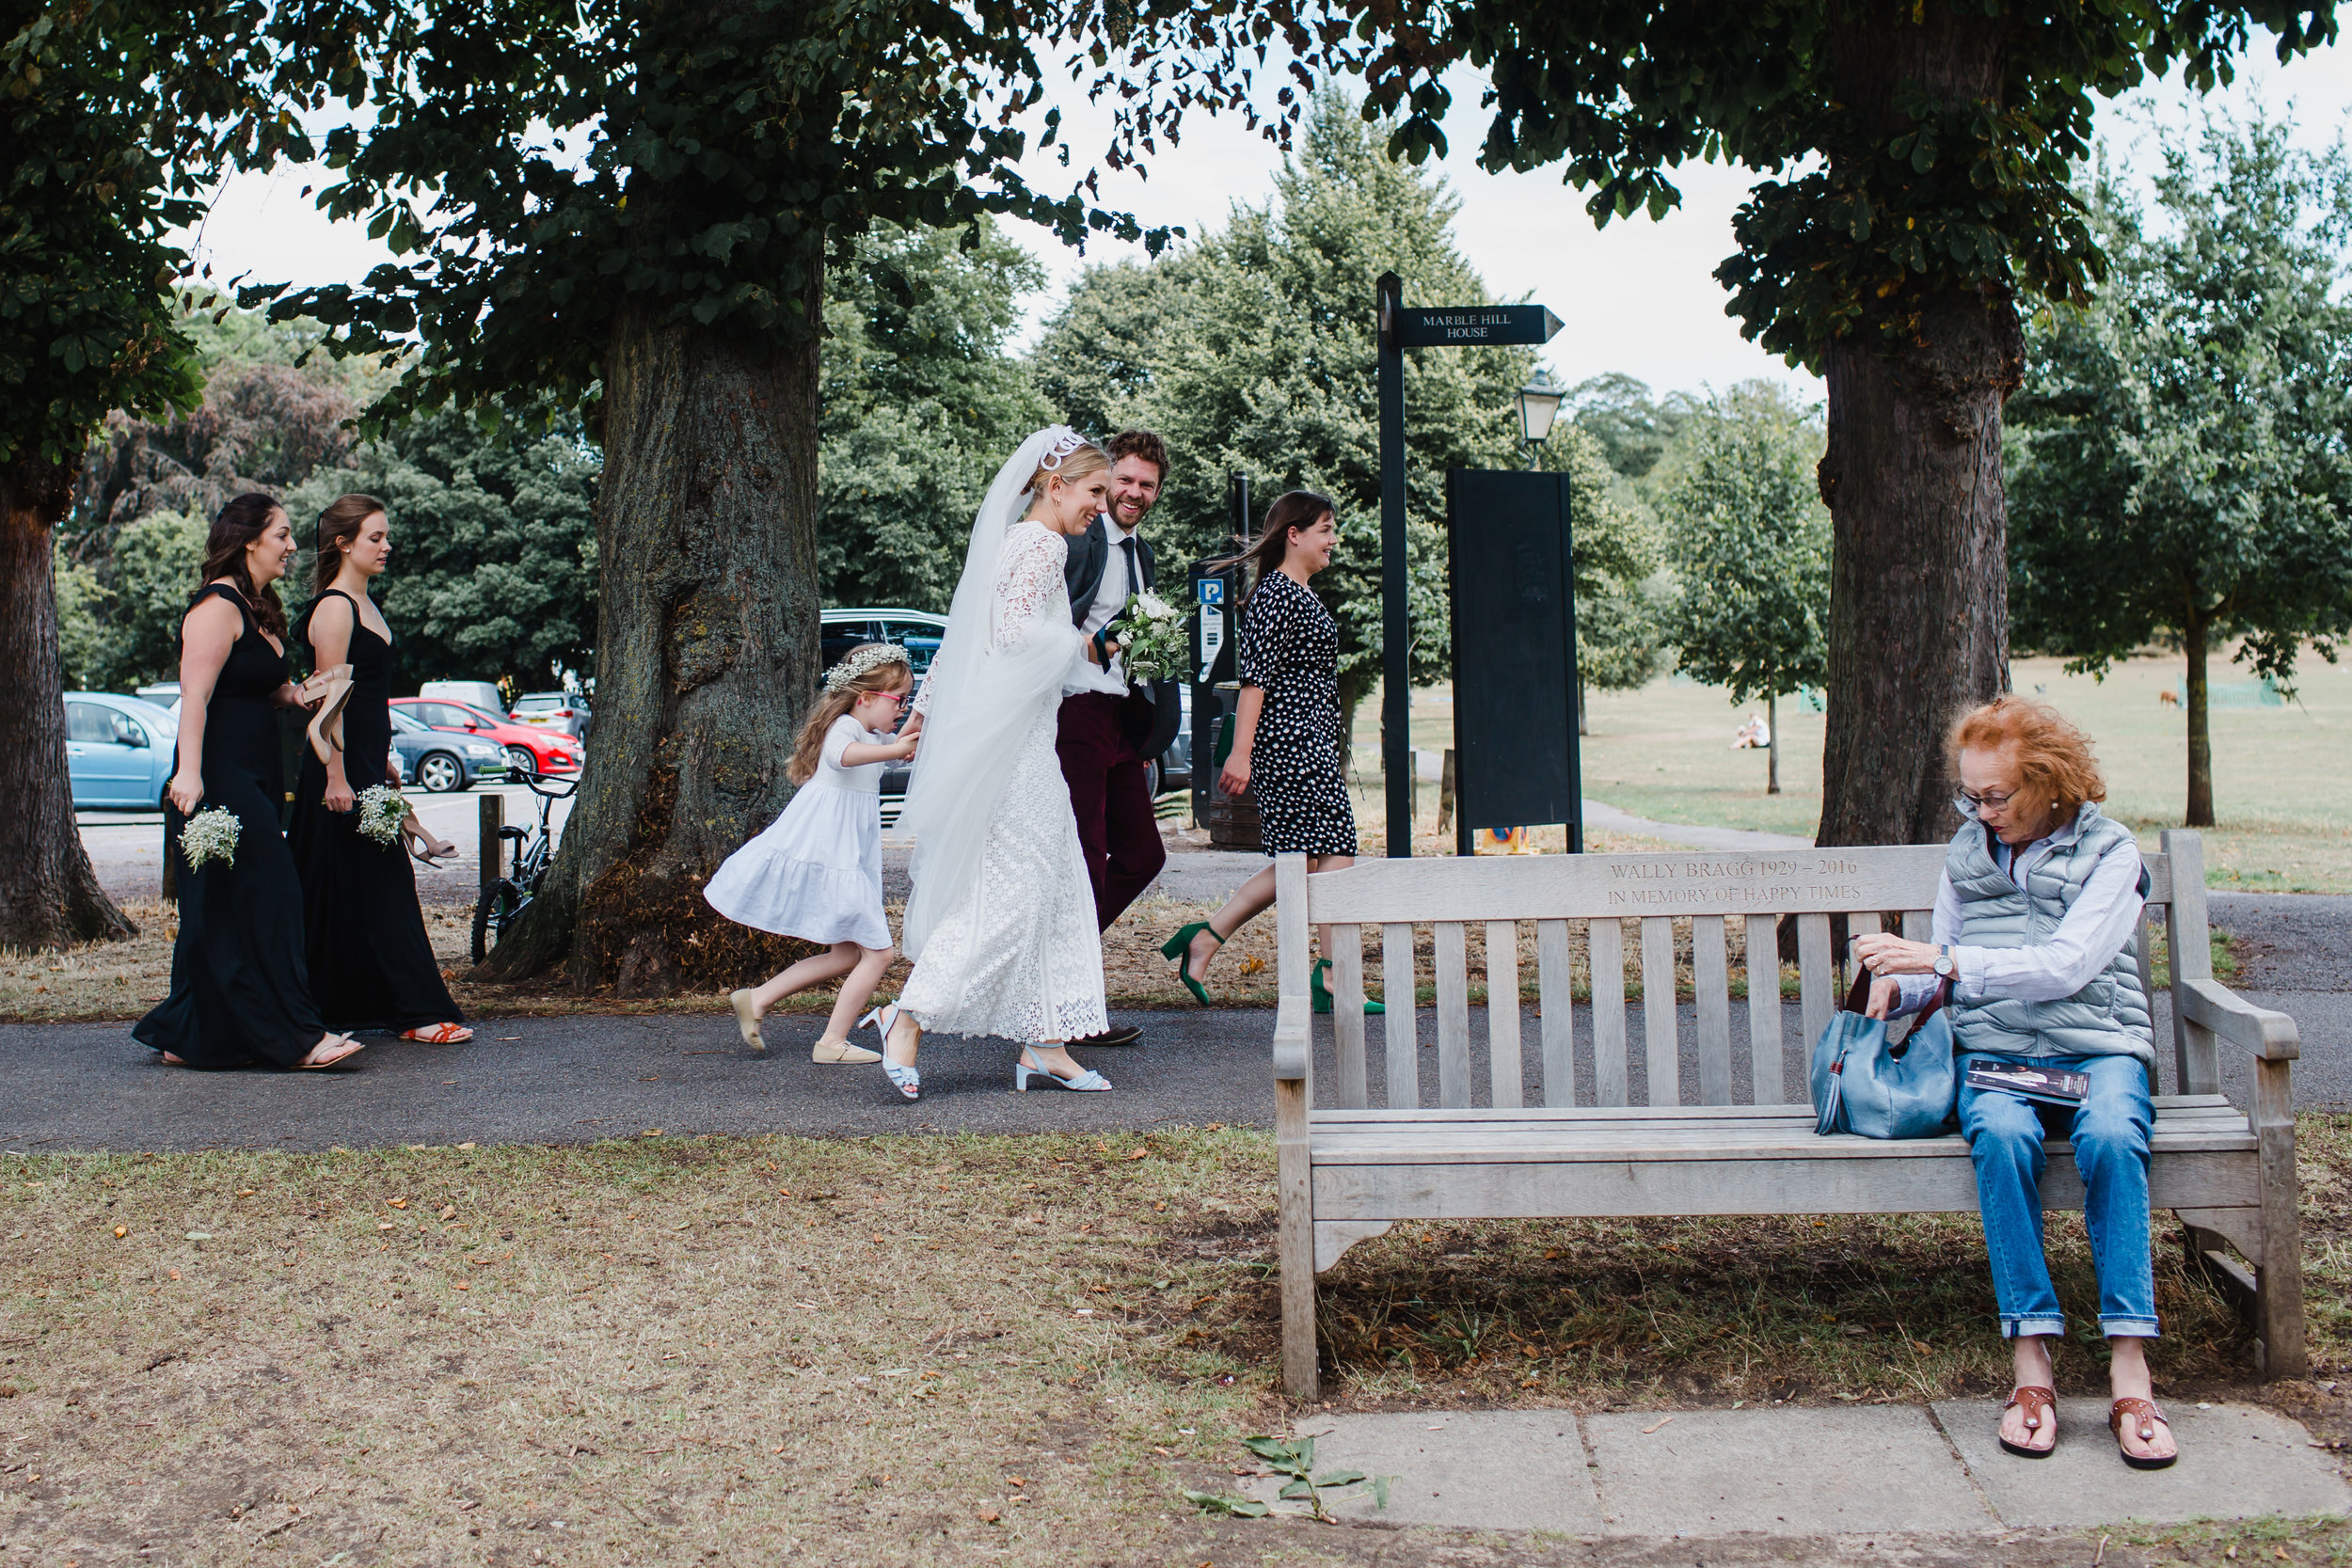 a wedding party walks through a park in twickenham while an old lady watches on.